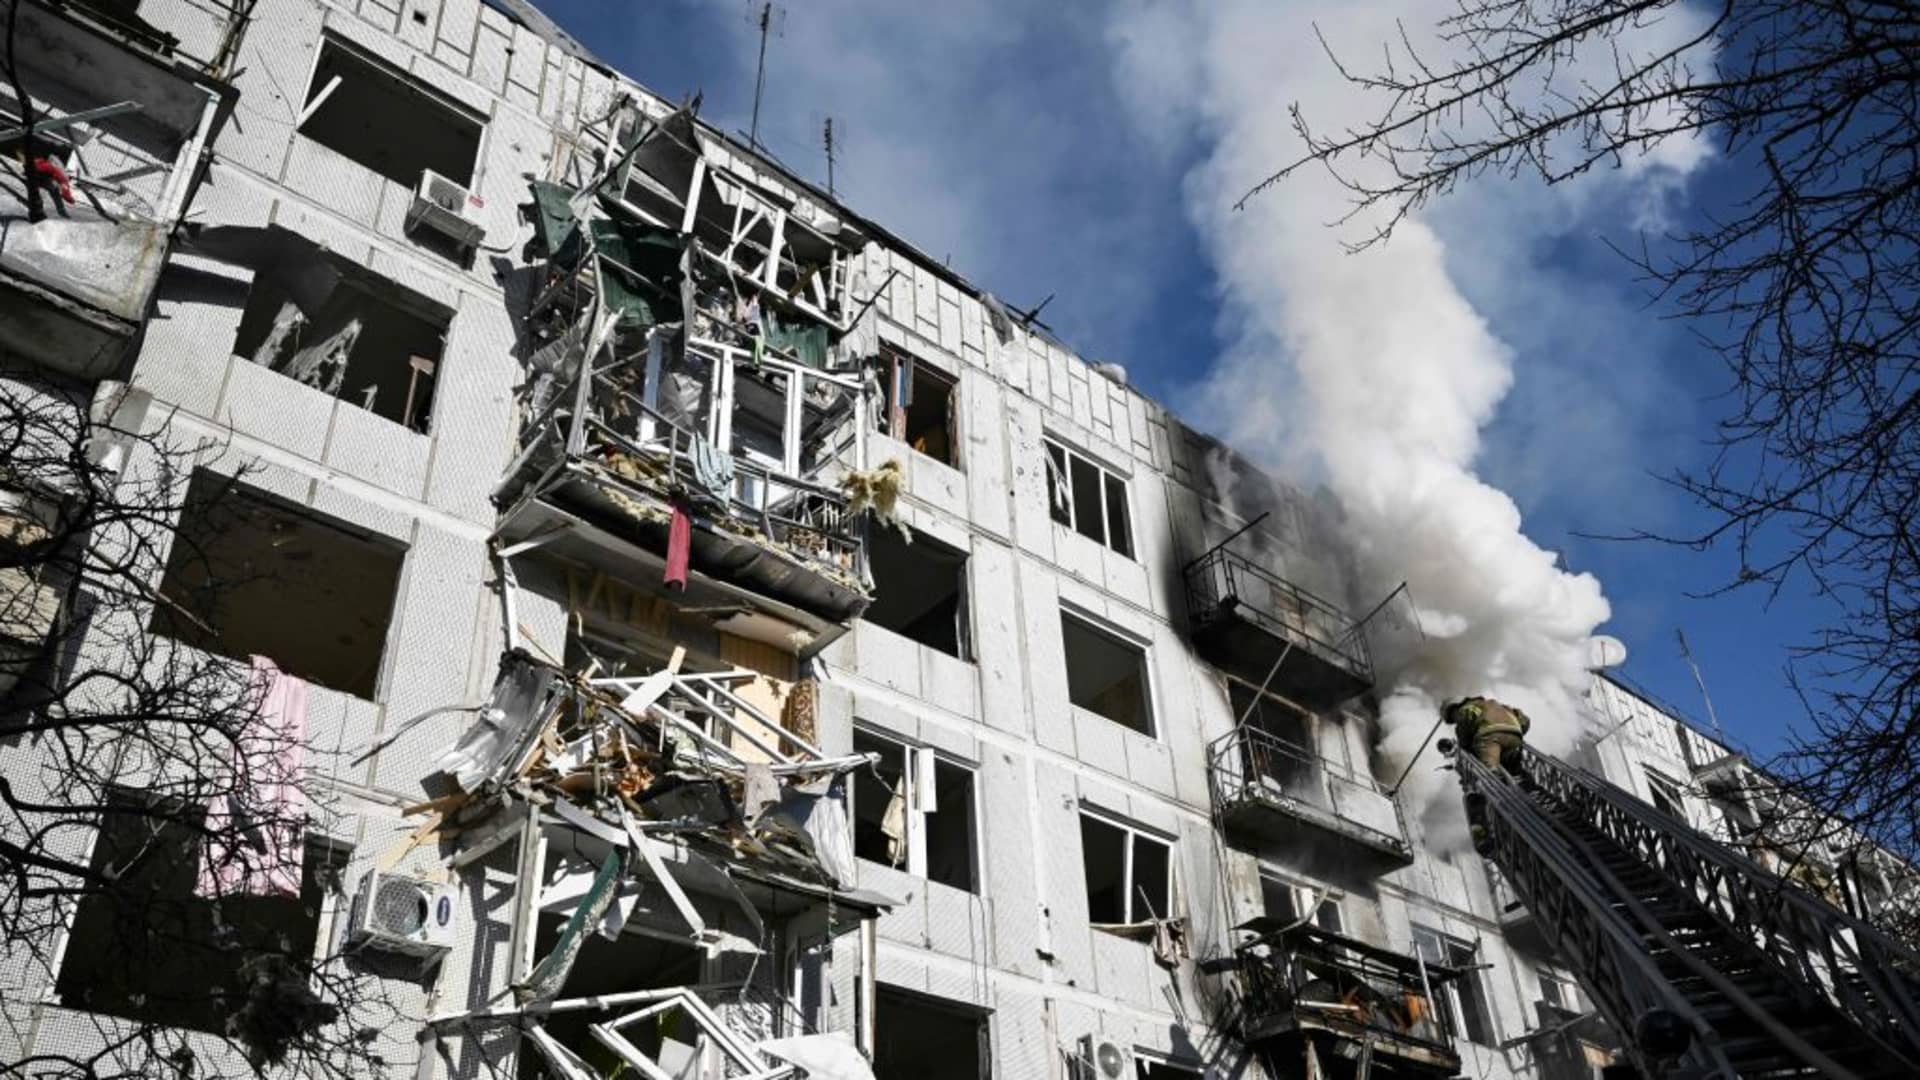 Firefighters work on a fire on a building after bombings on the eastern Ukraine town of Chuguiv on February 24, 2022, as Russian armed forces are trying to invade Ukraine from several directions.